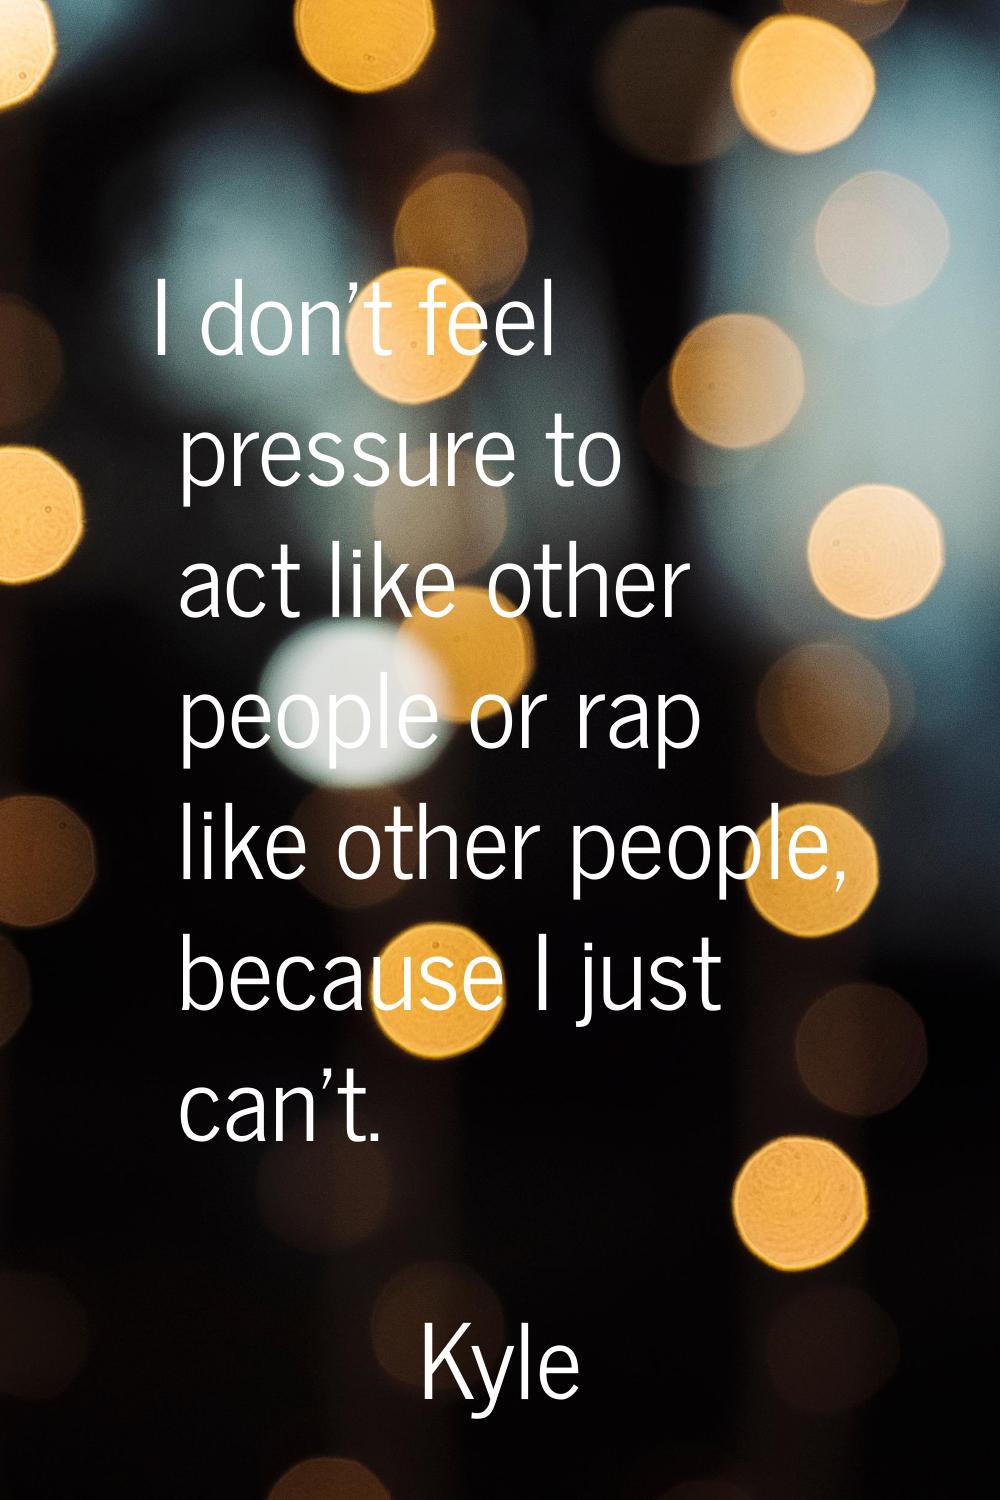 I don't feel pressure to act like other people or rap like other people, because I just can't.